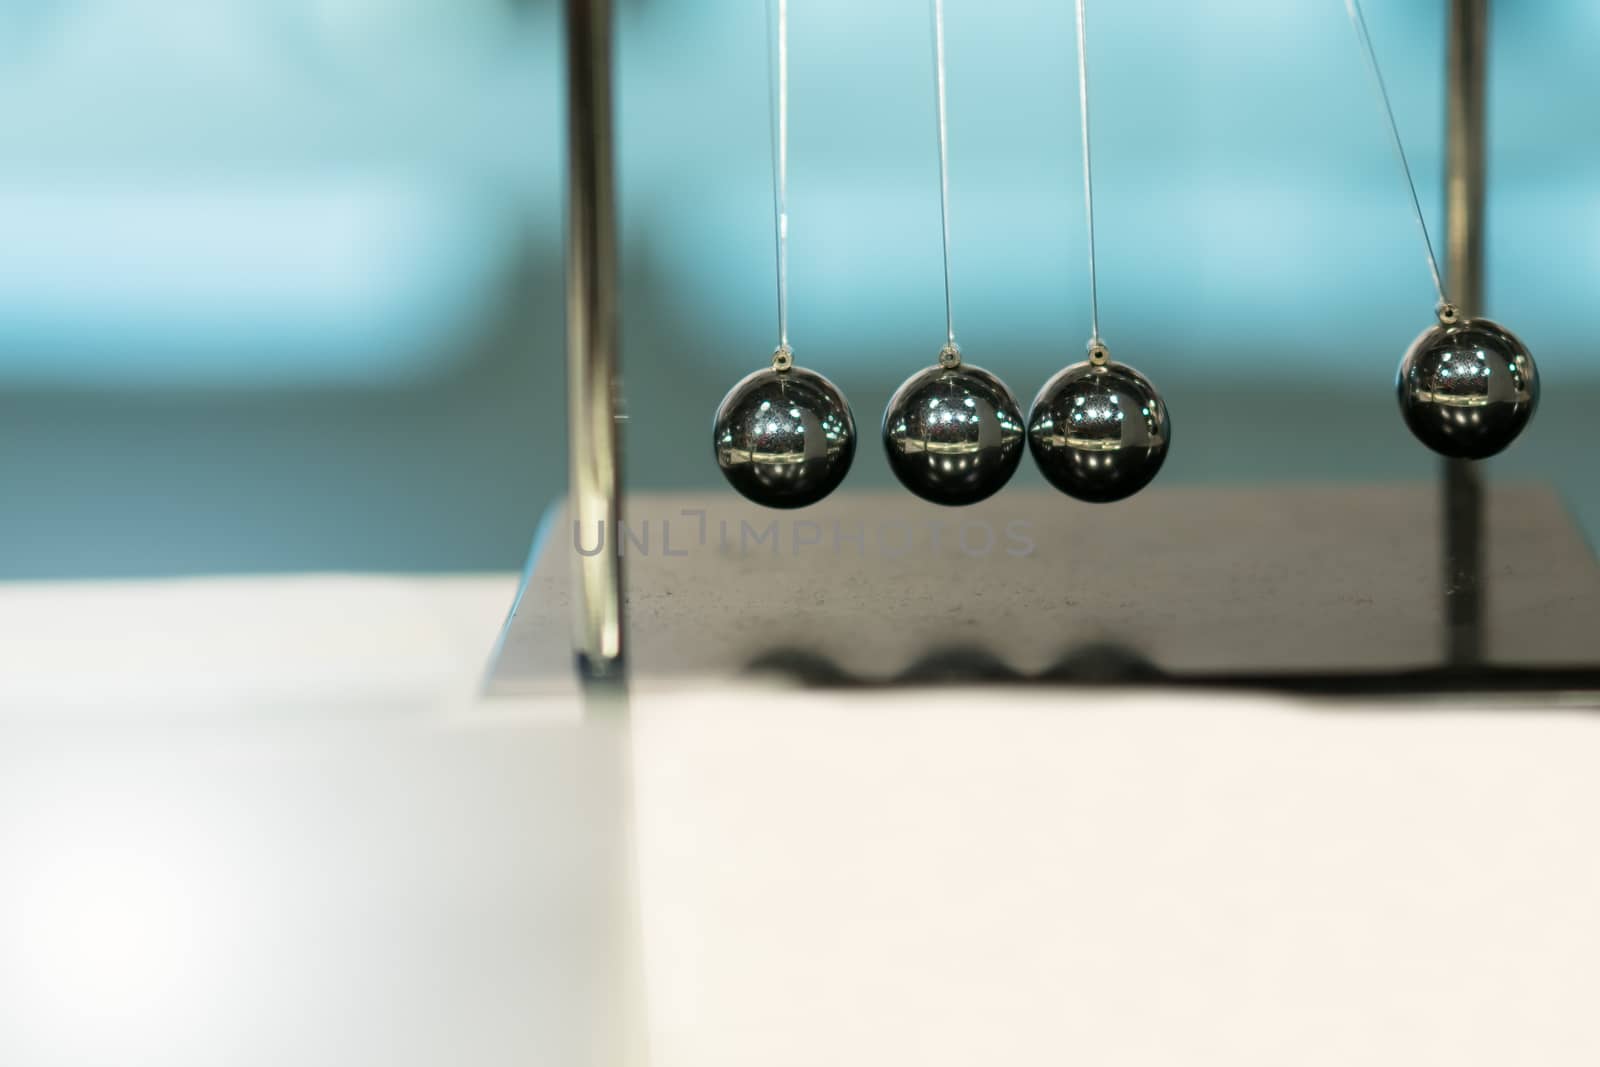 Balancing Balls Newton's Cradle on blurred backgrounds by psodaz